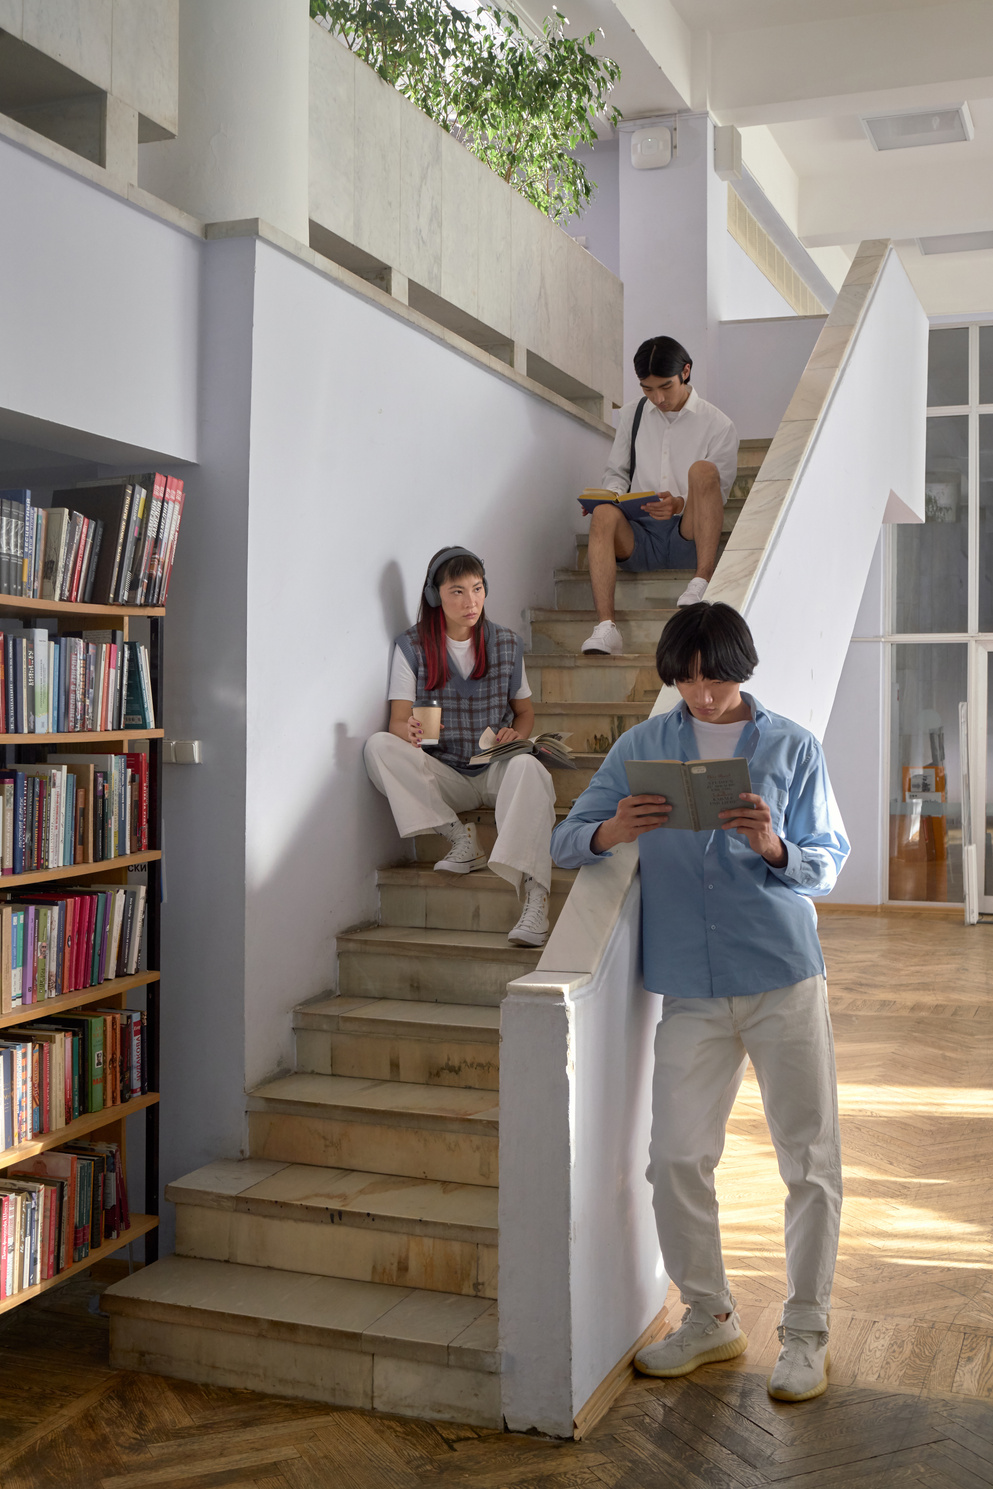 Students on a Staircase of a Library 